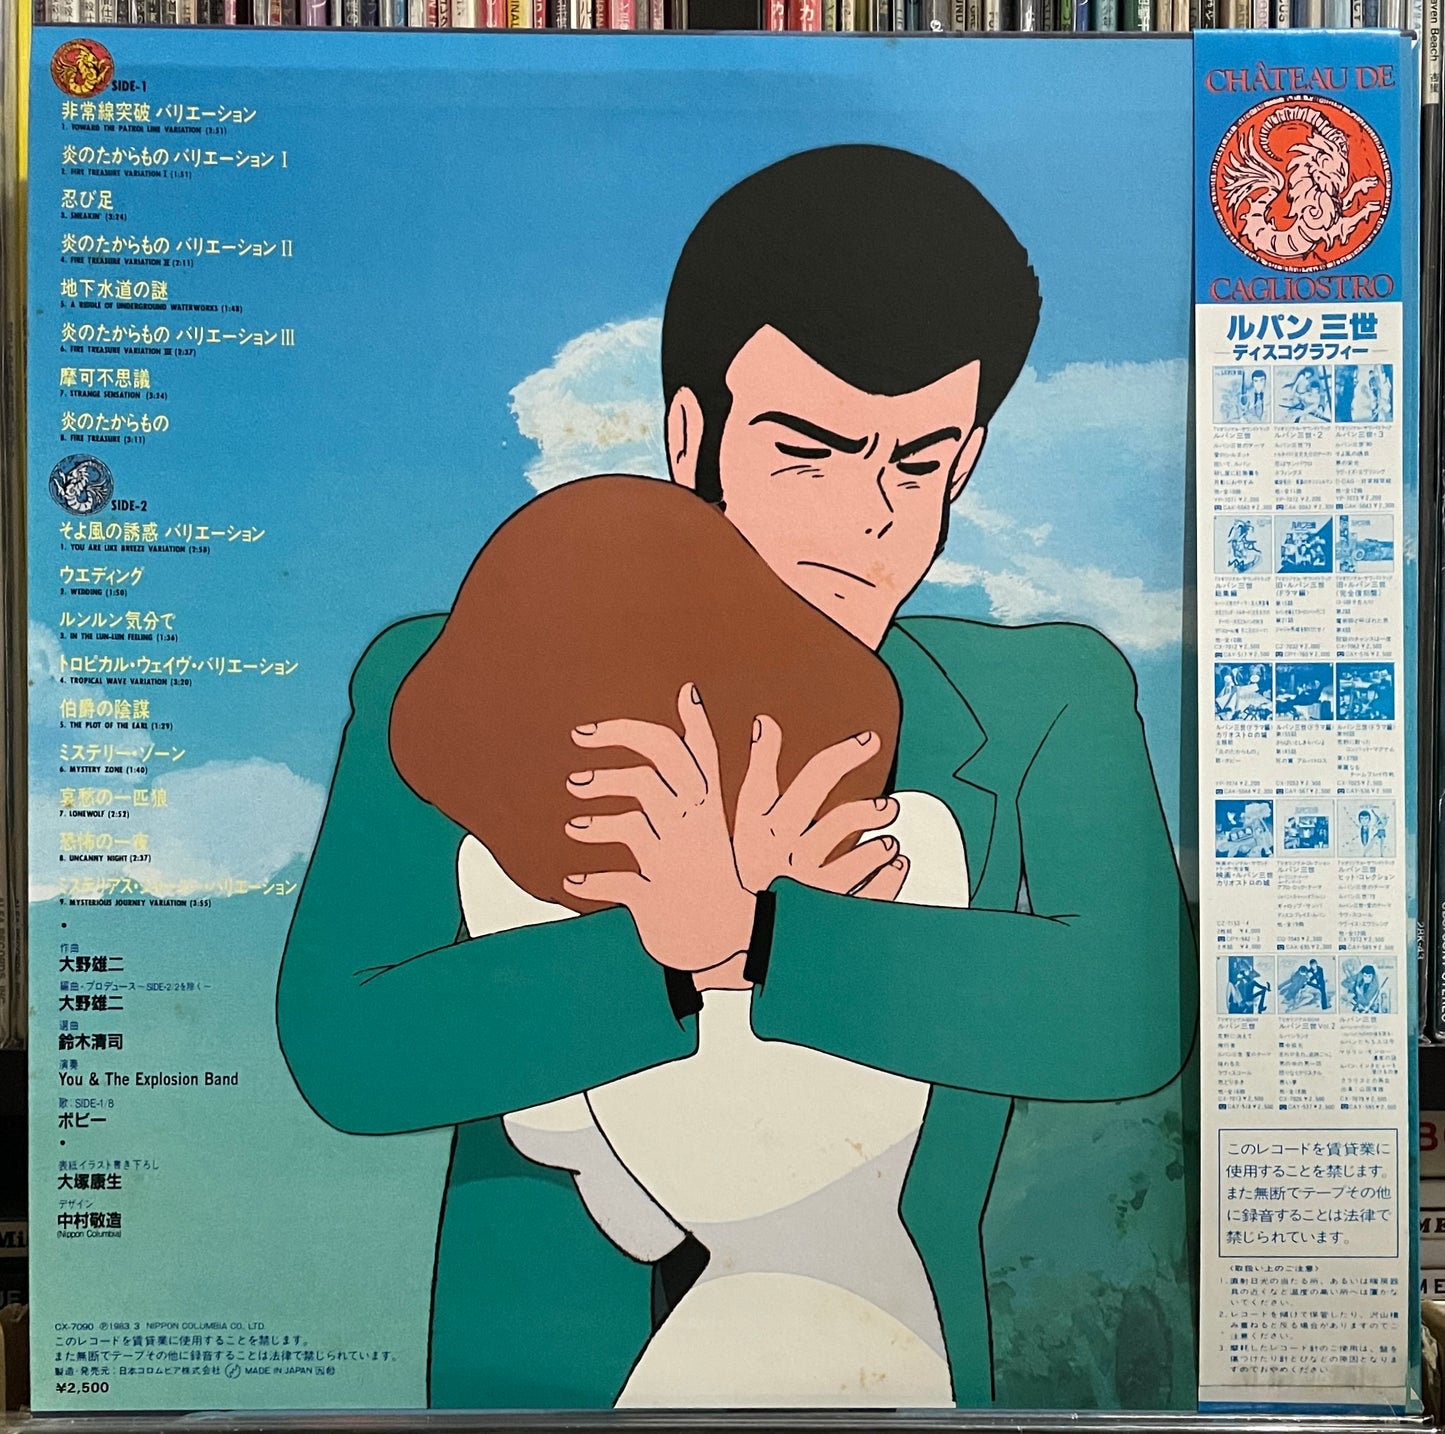 Yuji Ohno (You & The Explosion Band) “Lupin The 3rd: カリオストロの城” OST (1983)